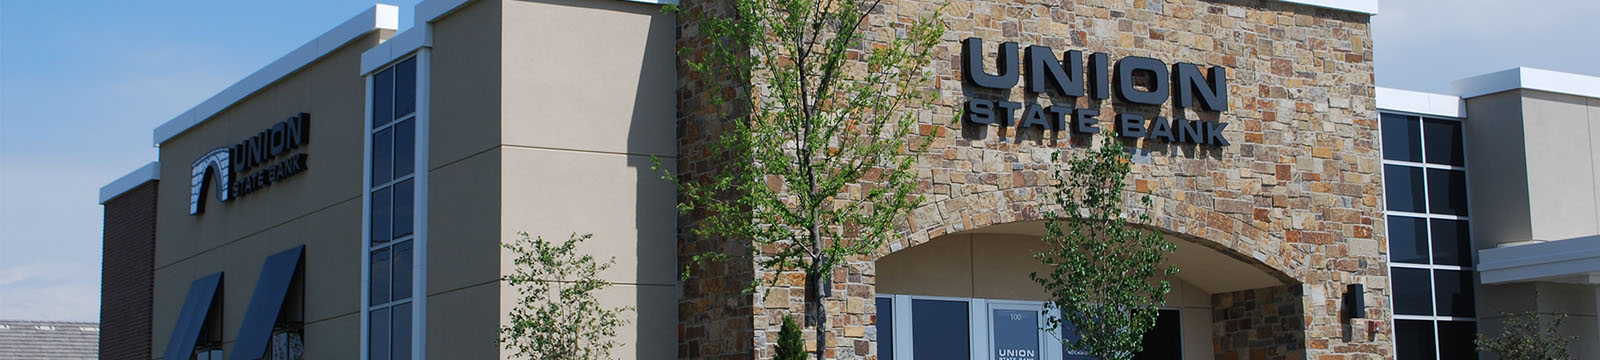 Image of the exterior of Union State Bank's Wichita East branch location.